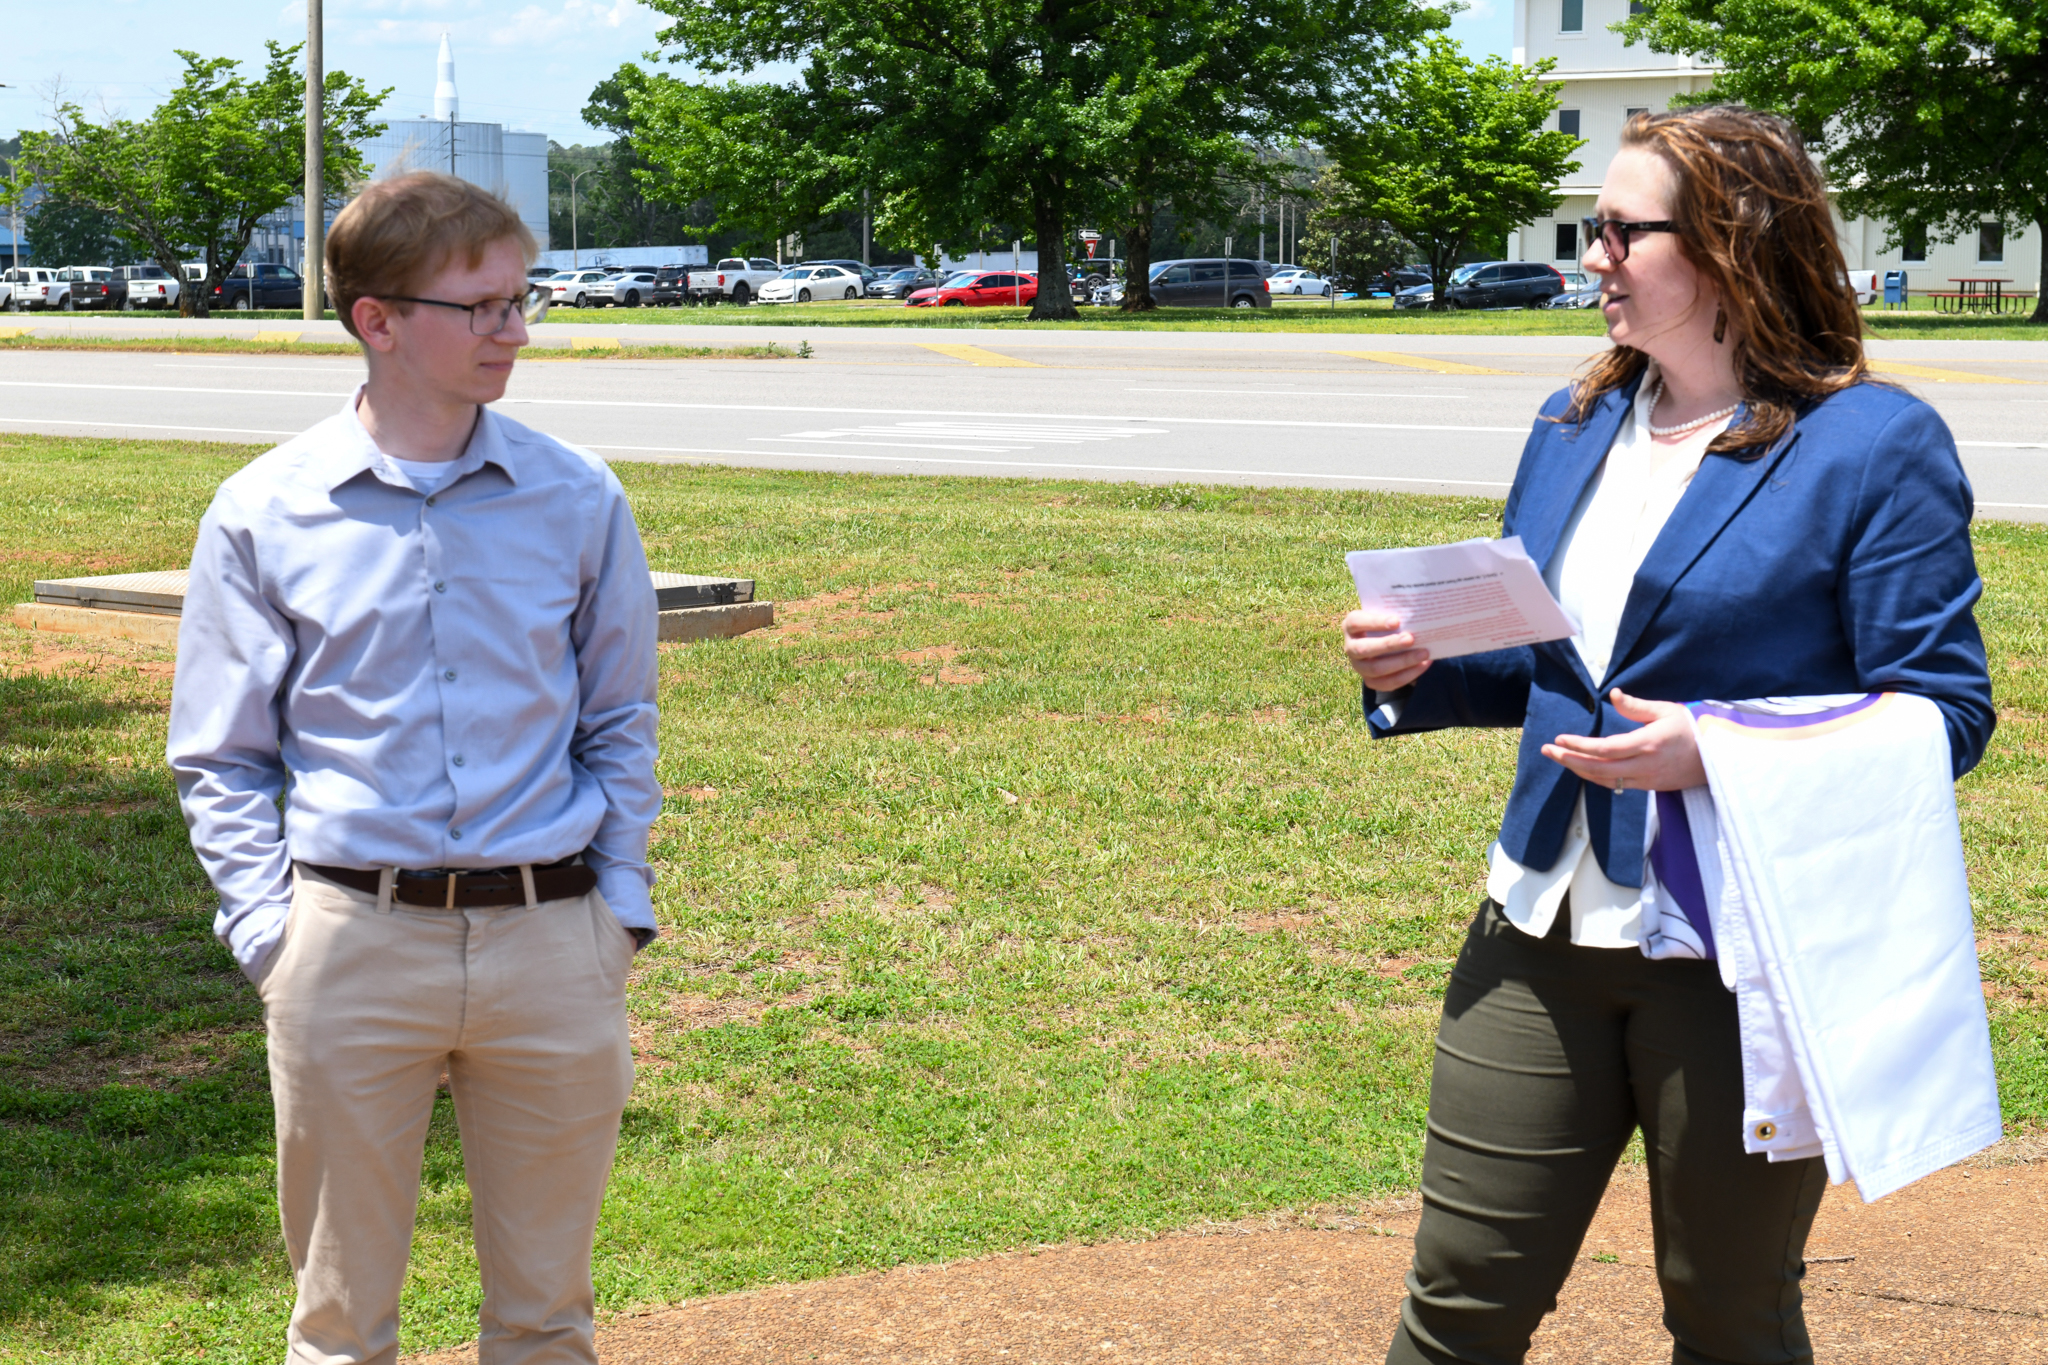 Chris Chiesa, left, listens as Lisa McCollum, deputy manager of the Exploration & Transportation Development Office, talks about Chiesa’s recognition as part of the Commercial Crew Program at NASA’s Marshall Space Flight Center during the Starliner flag-raising ceremony May 2.